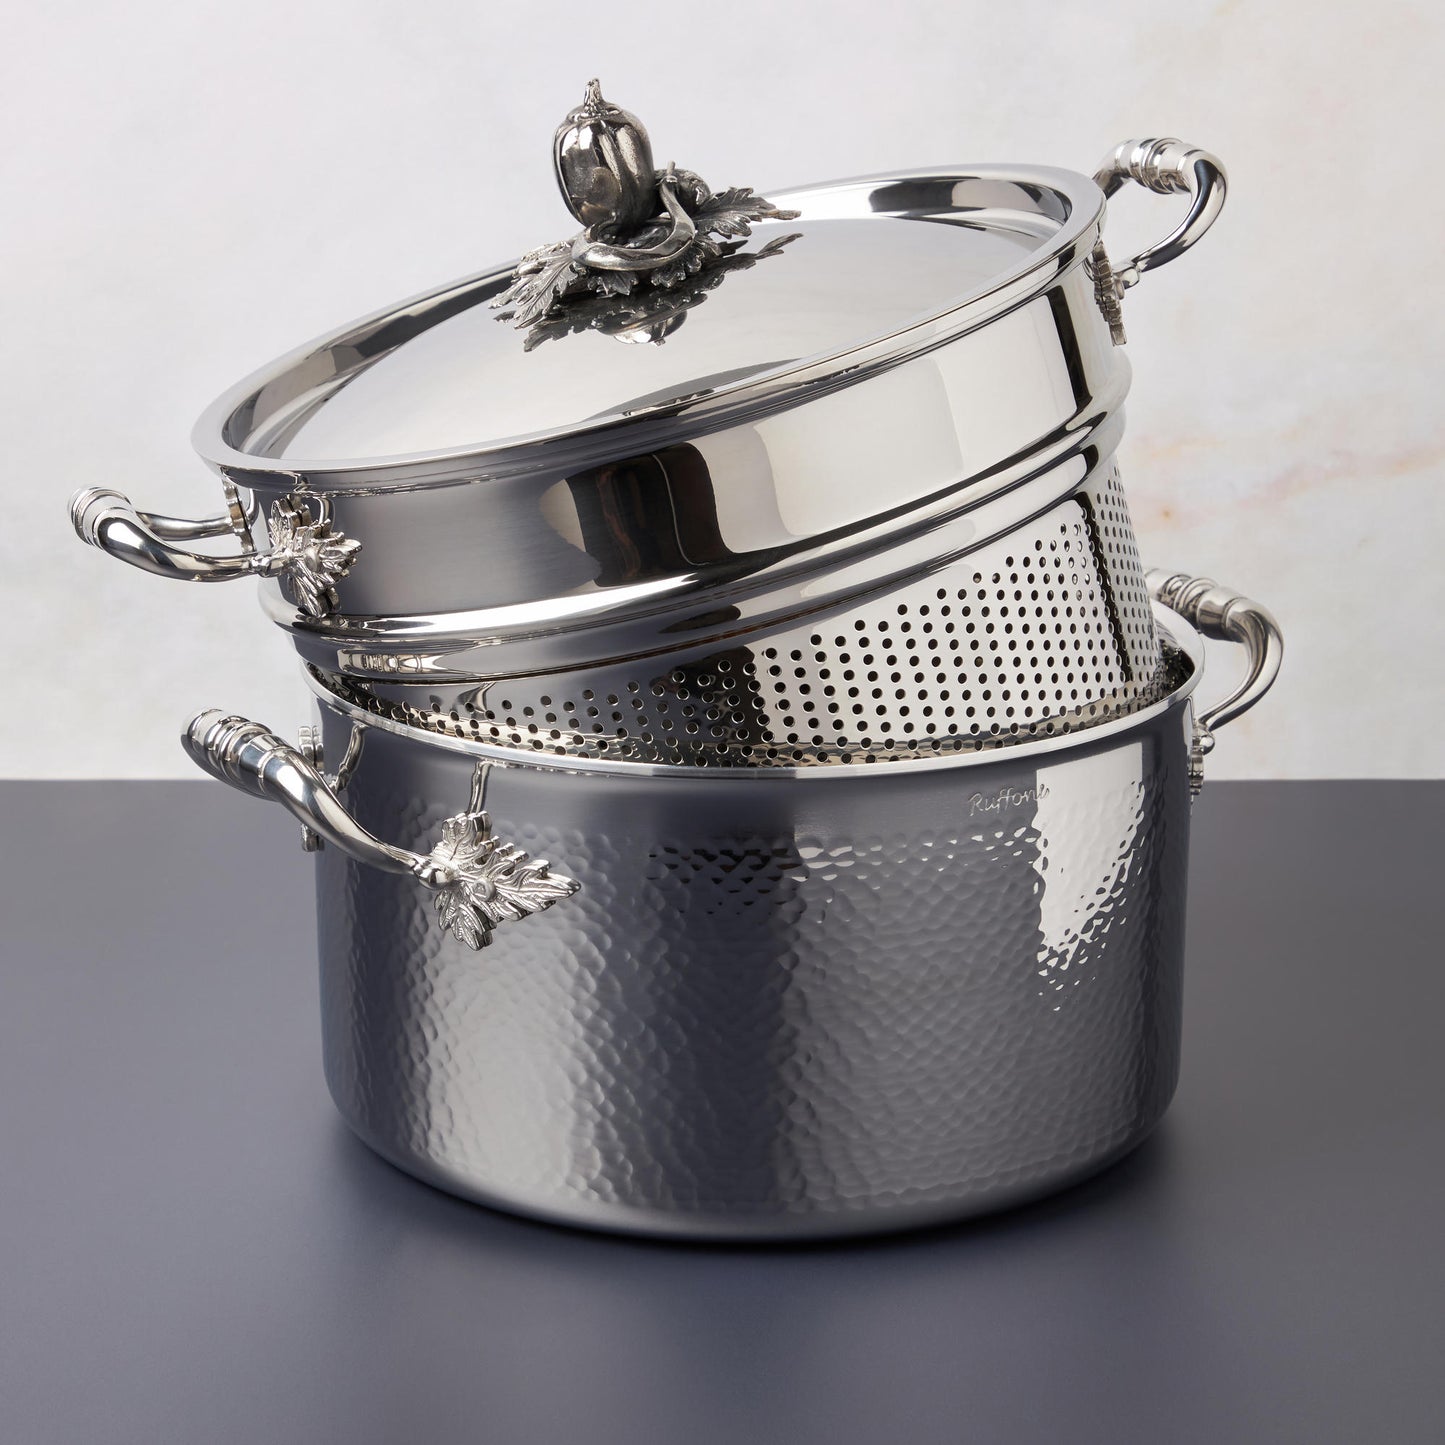 Opus Prima hammered clad stainless steel stockpot with decorated silver-plated lid knob finial from Ruffoni photographed with the matching pasta insert